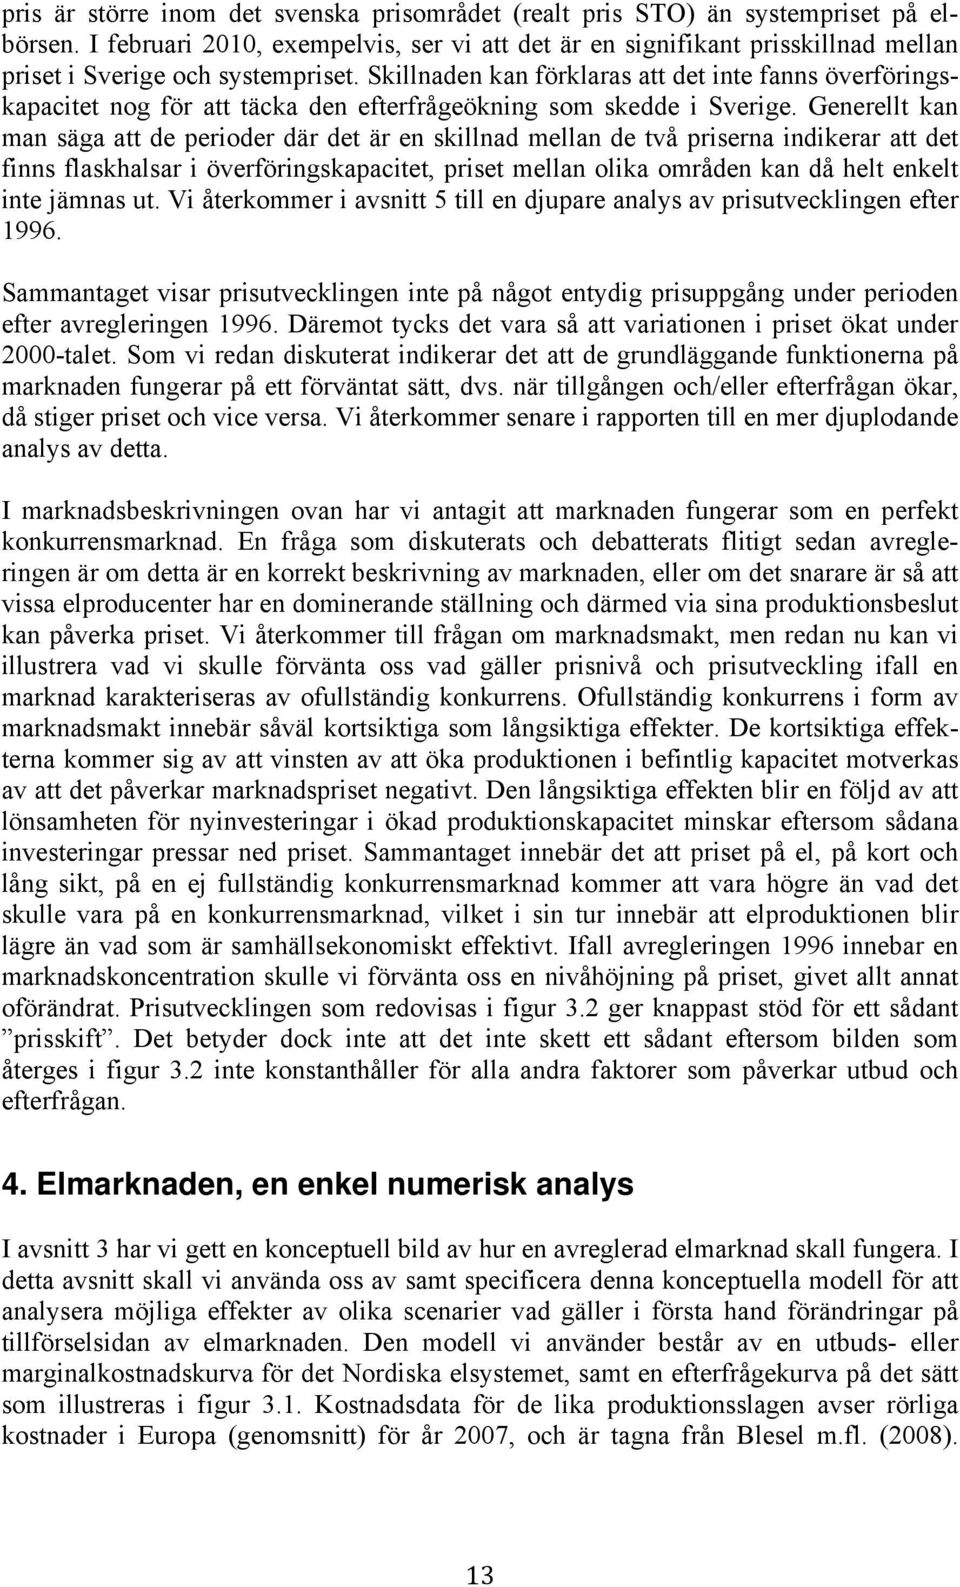 Private Costs for Electricity and Heat Generation. Rapport från projektet IEA and CASES Cost Assessment for Sustainable Energy Markets. Project No 518294 SES6, Deliverable No D4.1. Produktionsdata är tagna från IEA (www.